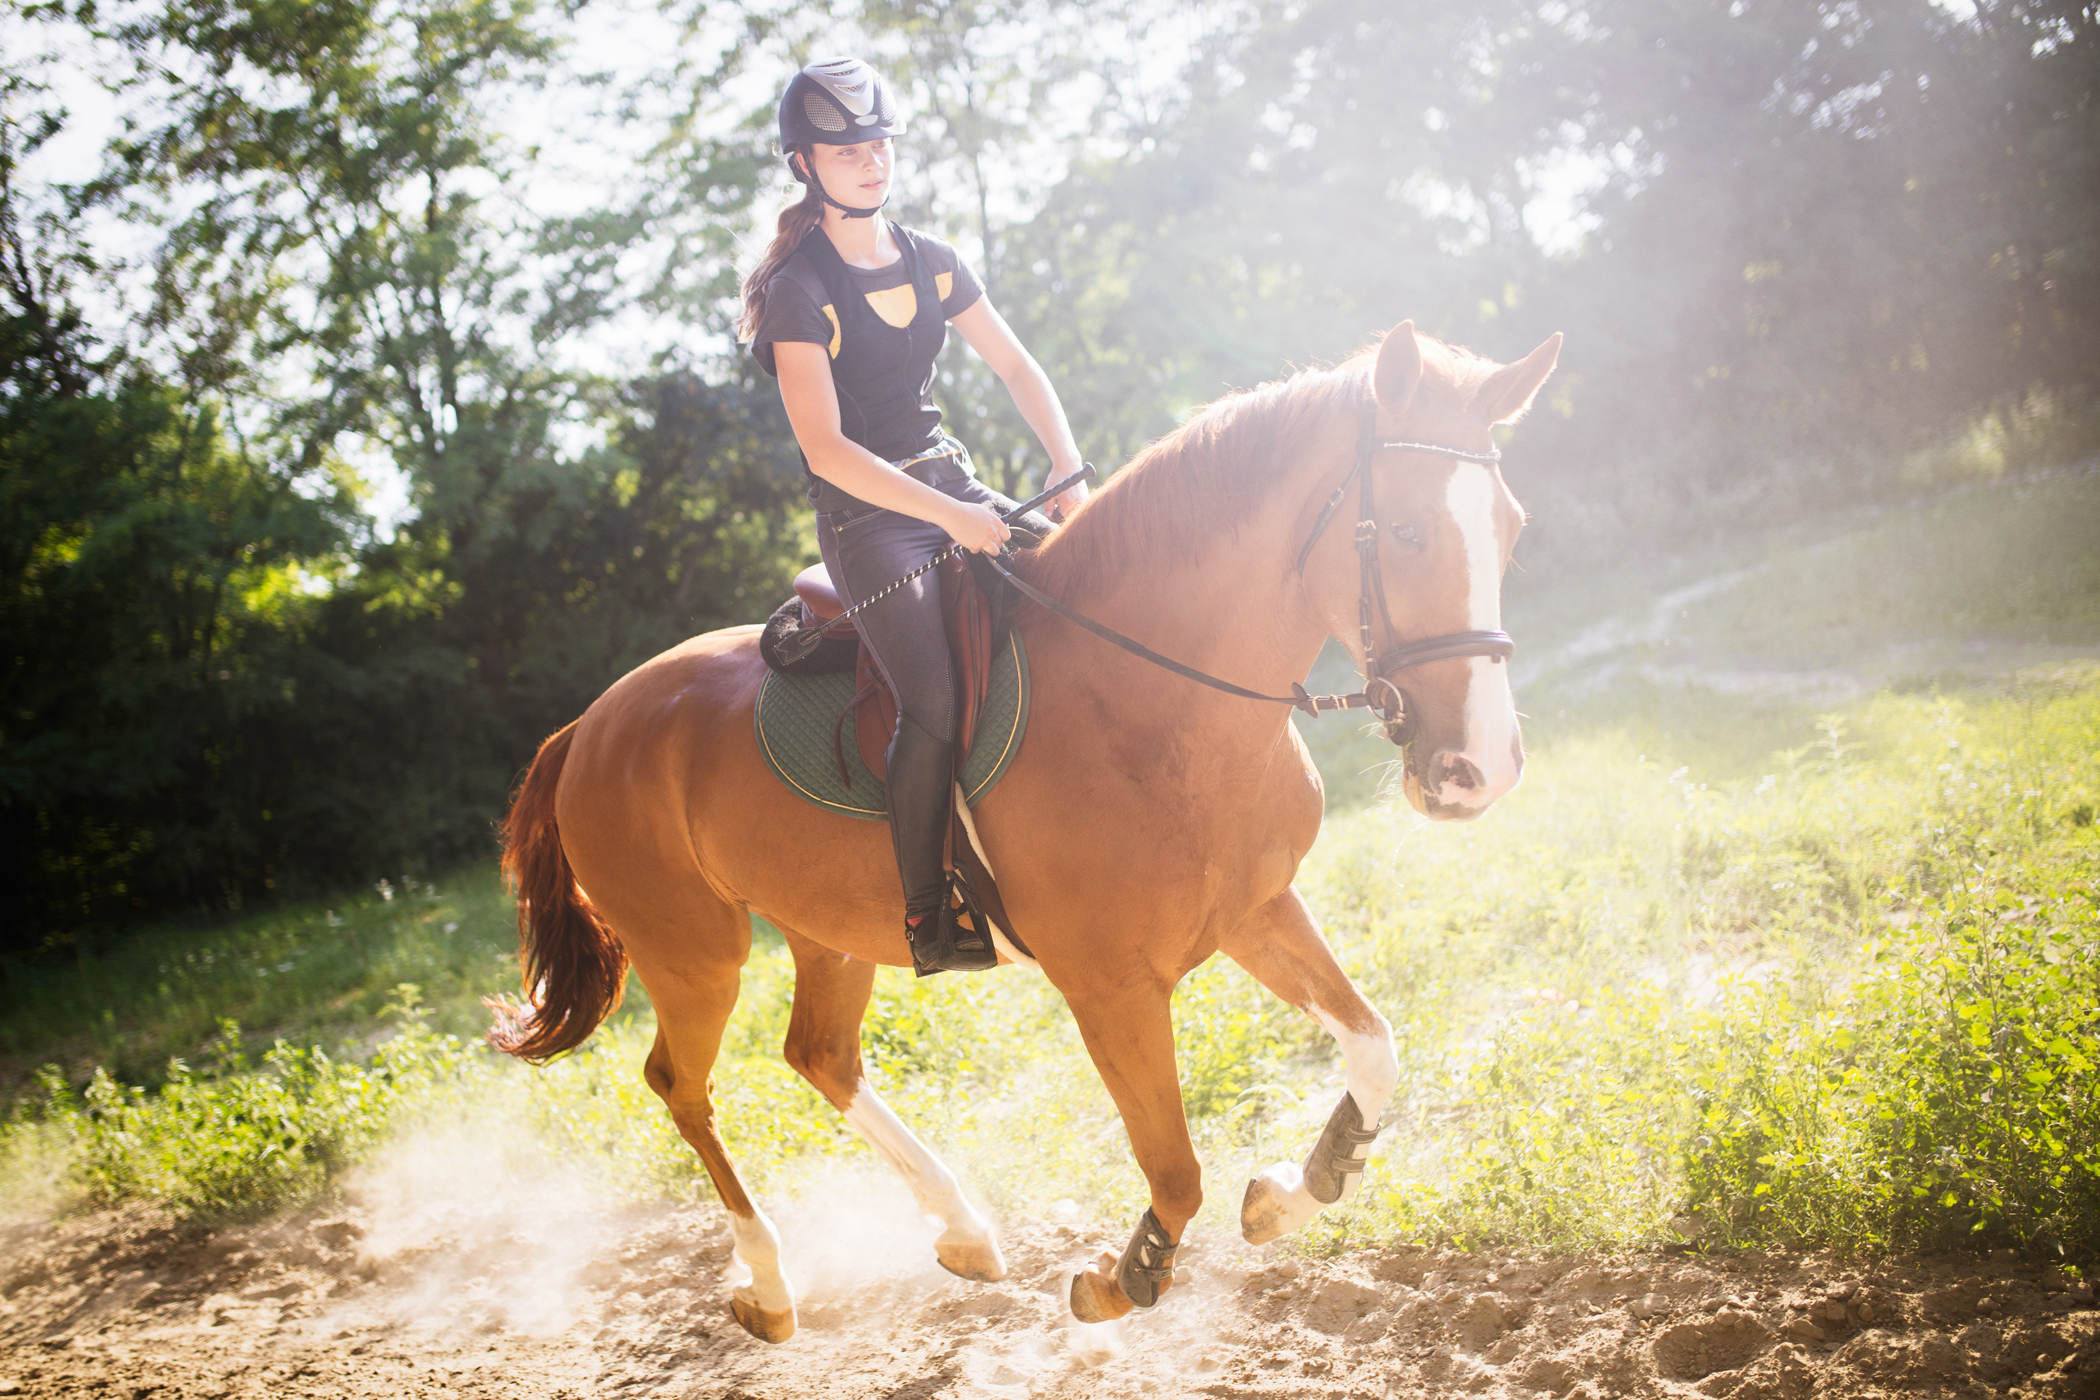 Athletic rider rides horse and burns energy.